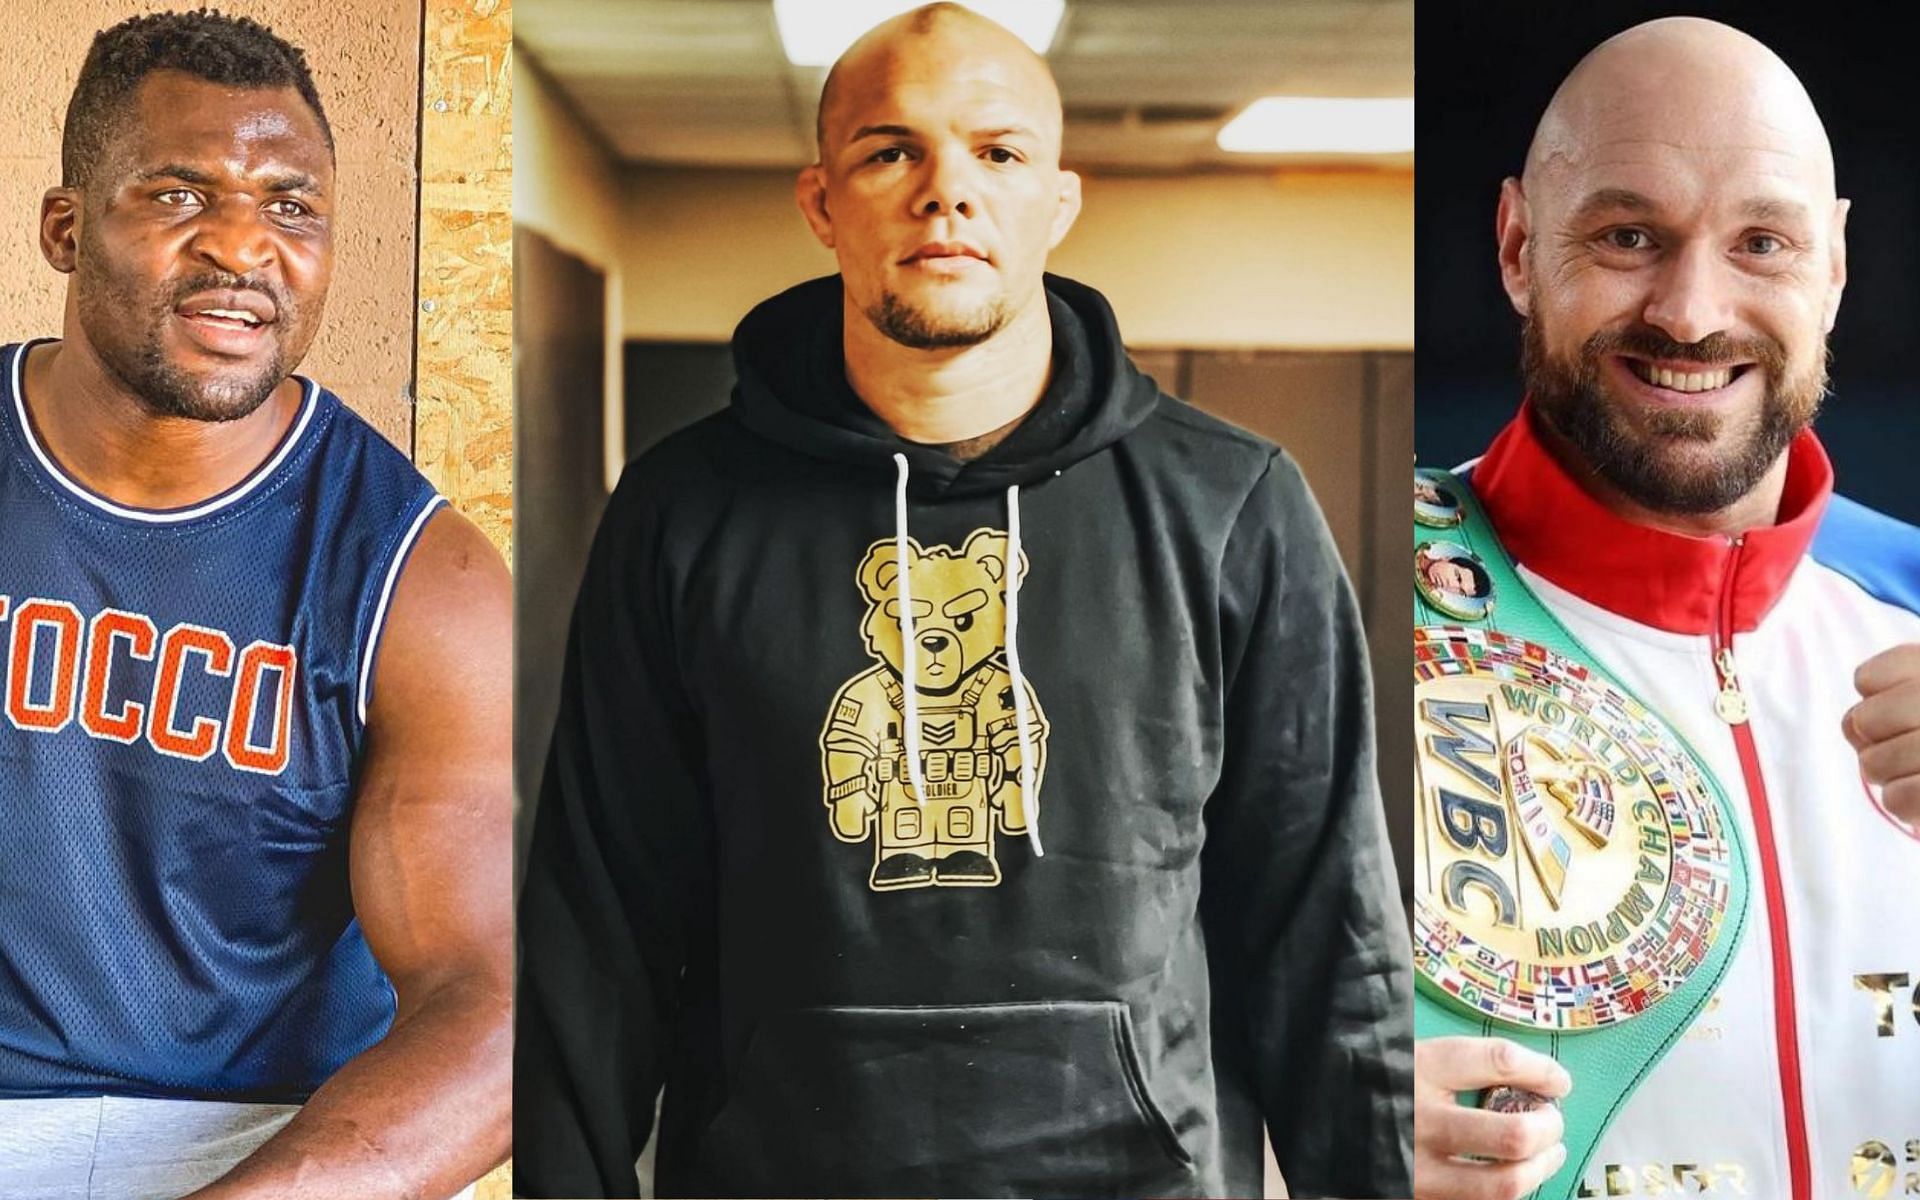 (From left to right) Francis Ngannou, Anthony Smith and Tyson Fury [Image Courtesy: @francisngannou, @tysonfury and @lionheartsmith on Instagram]